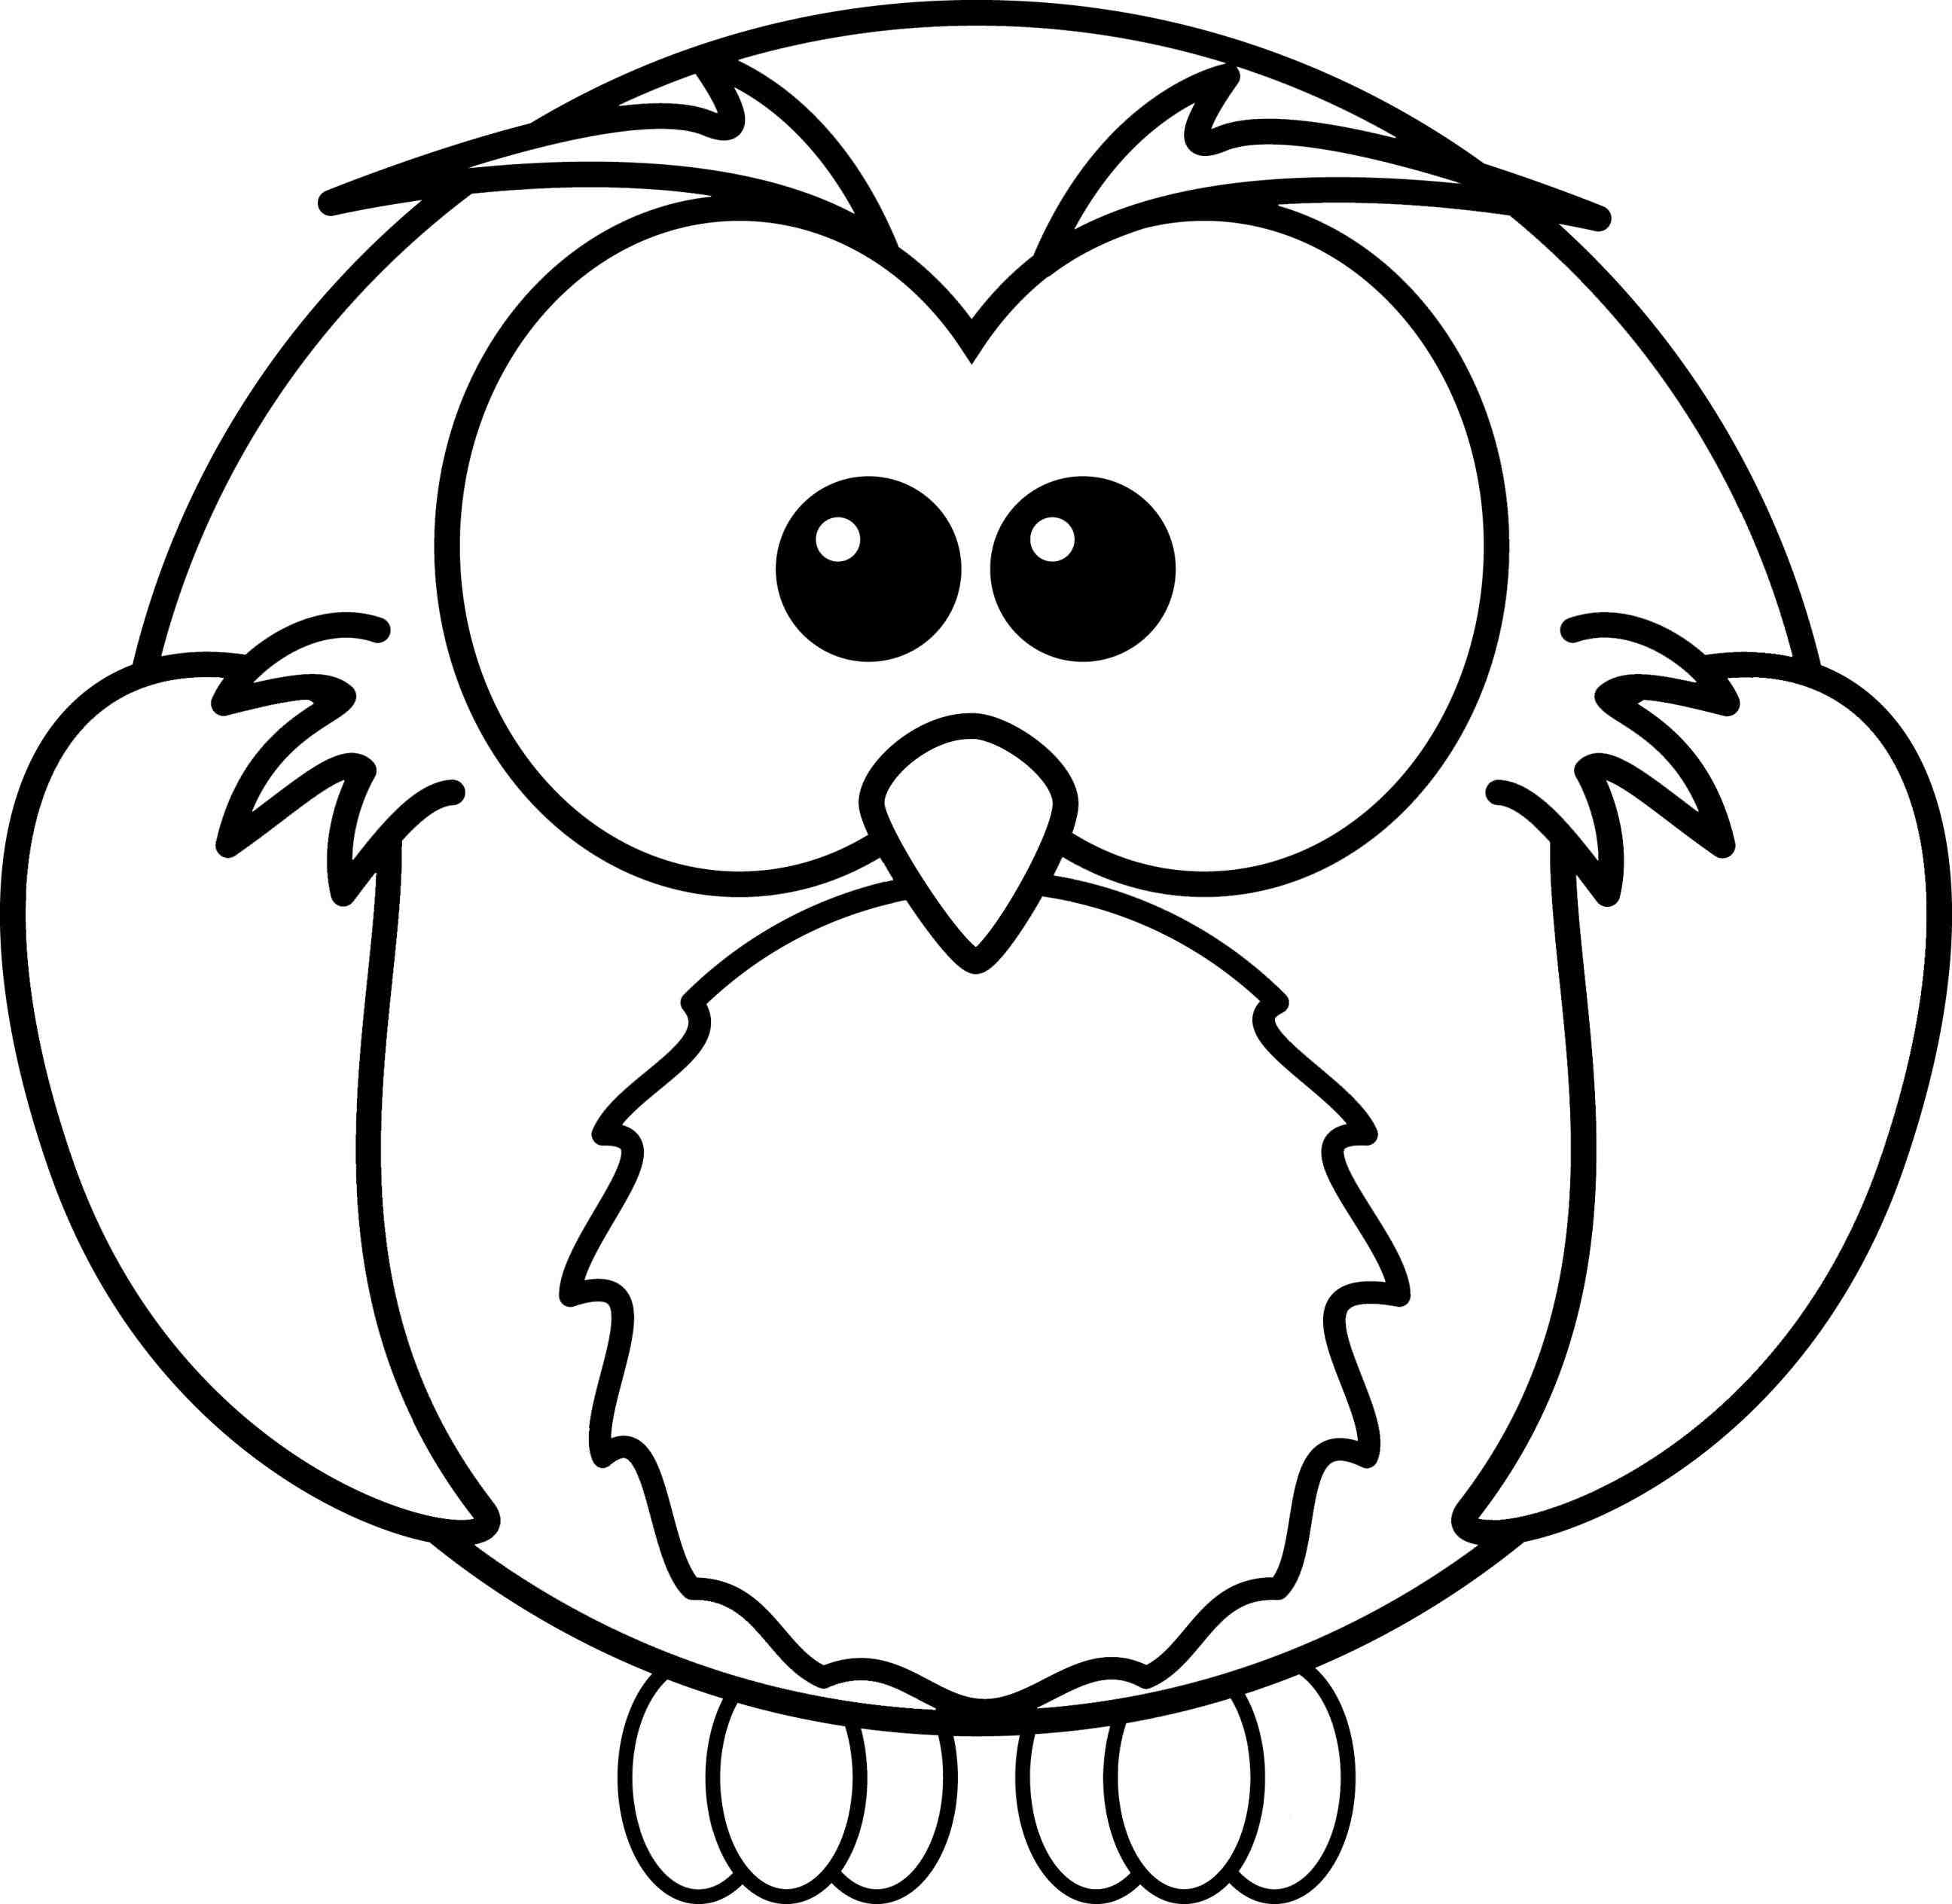 cute owl face drawing › copay.online